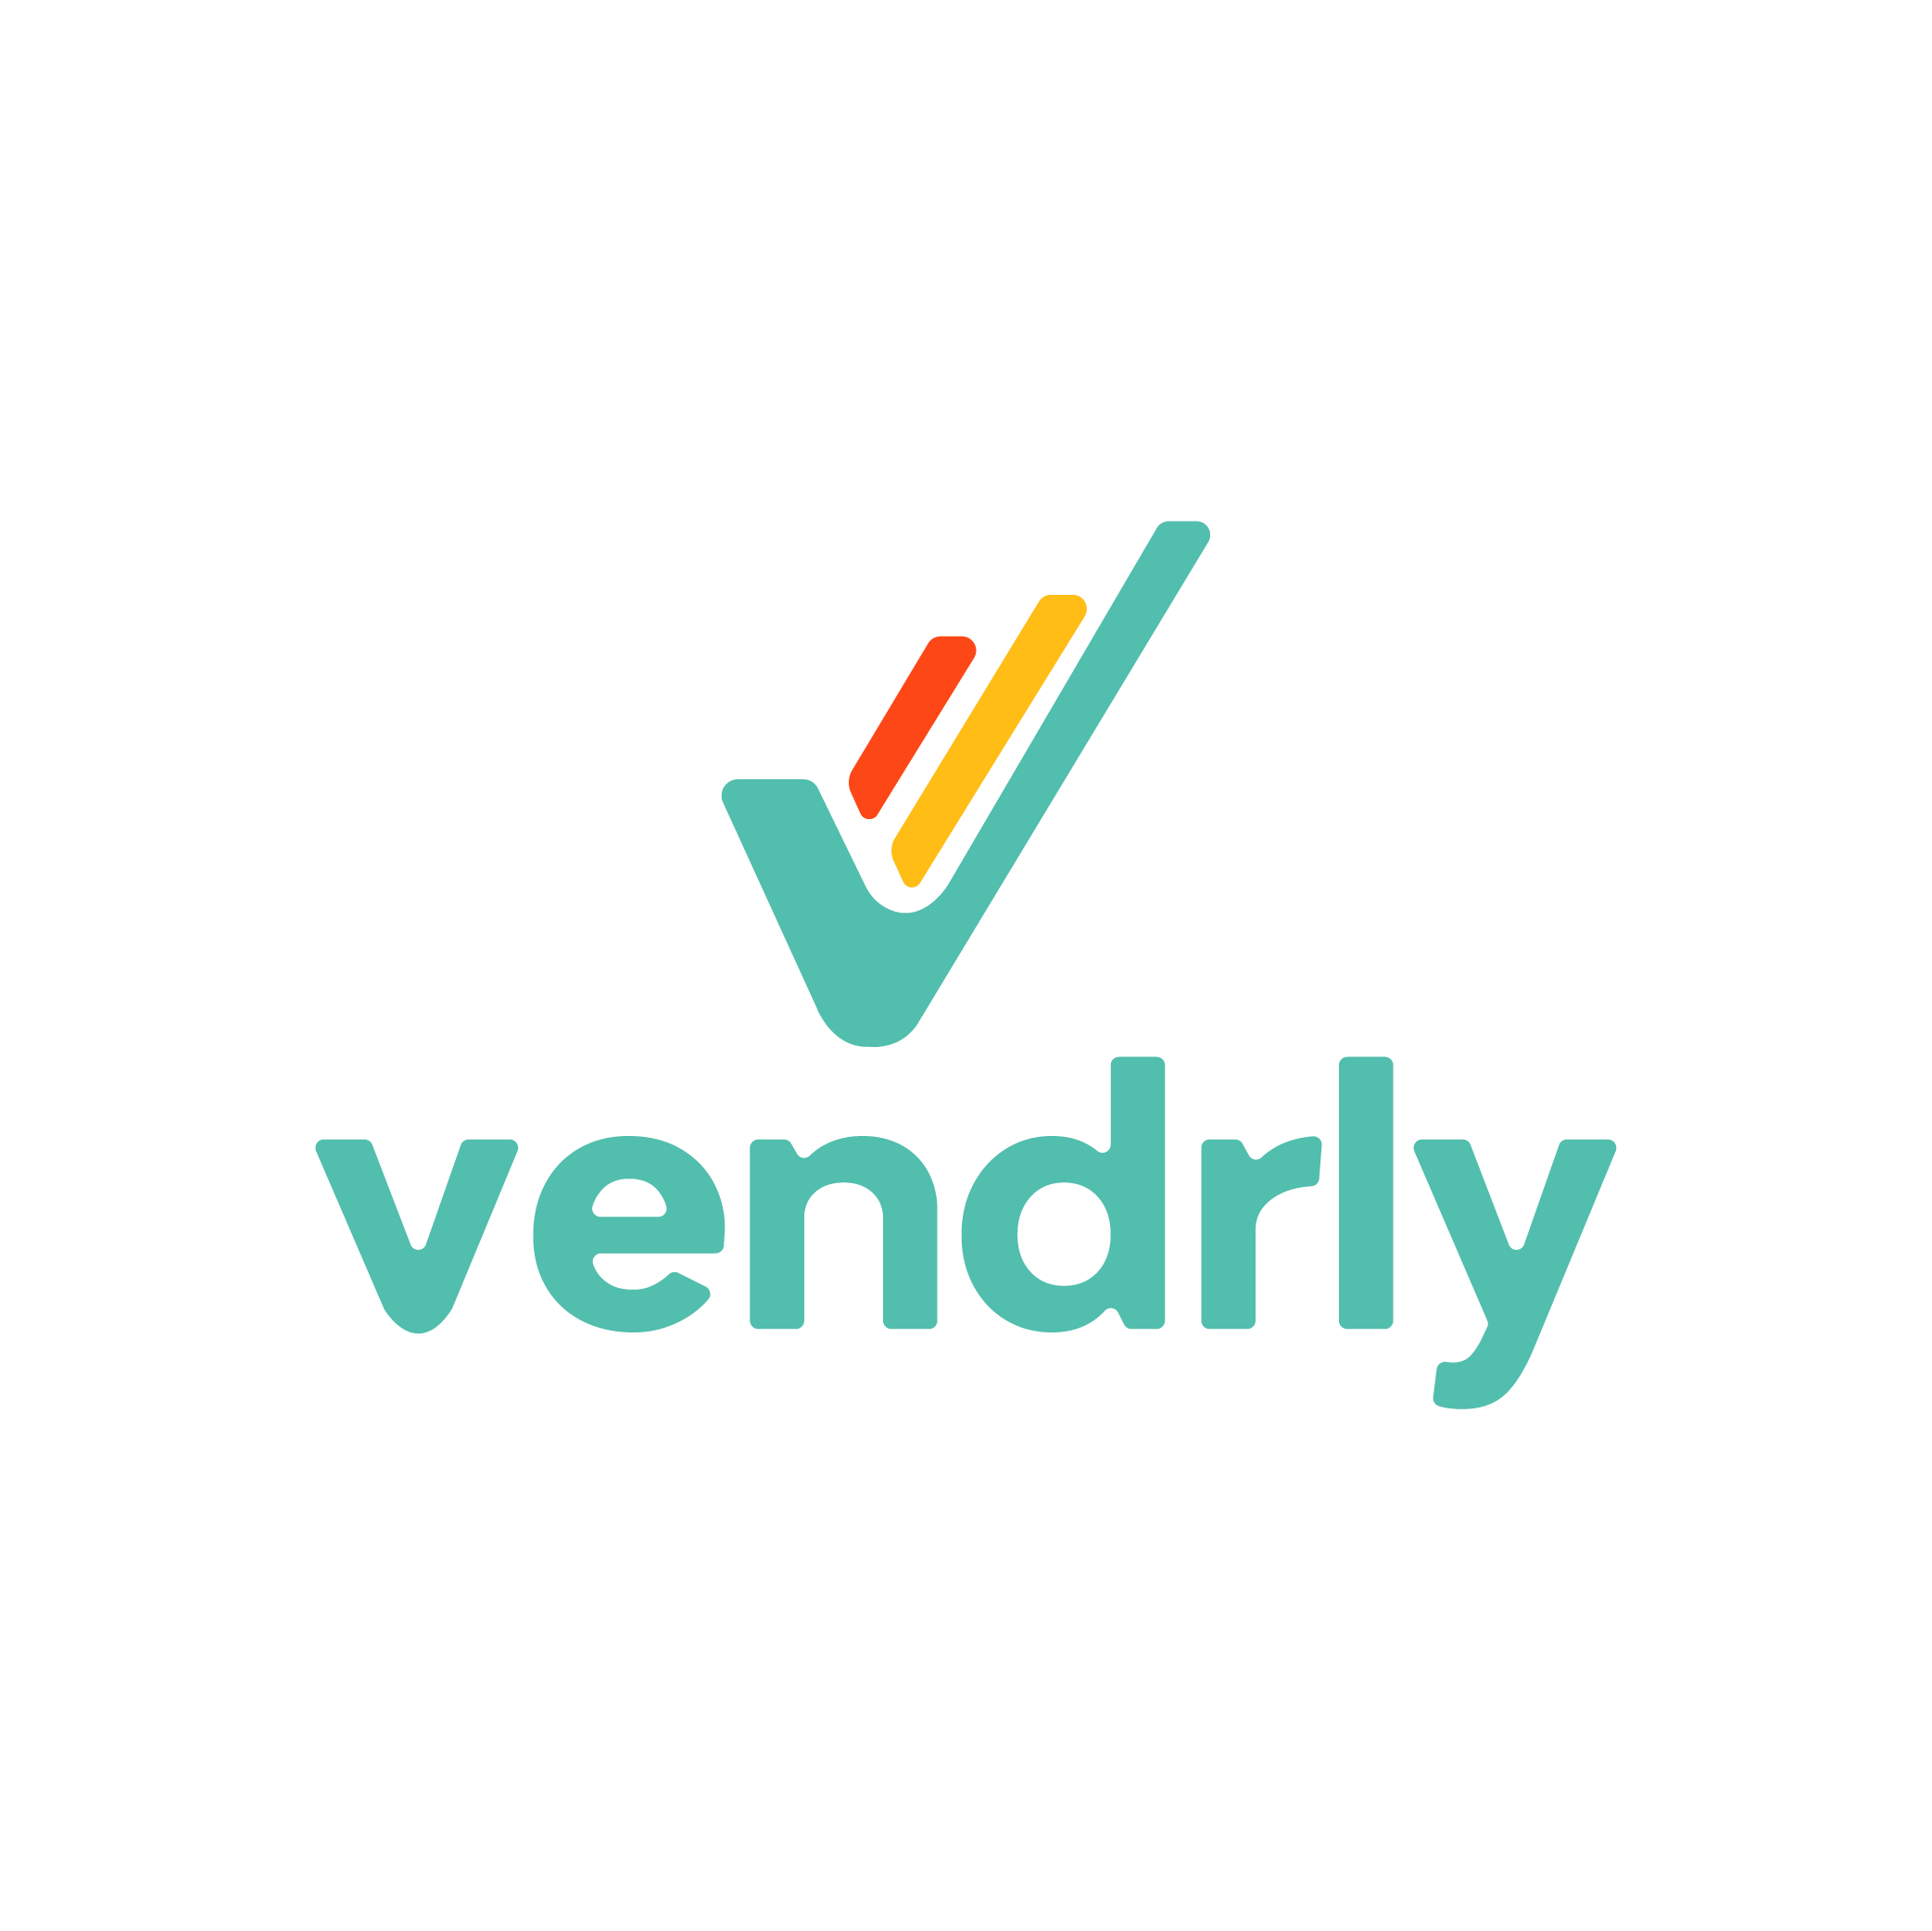 vendrly Logo & Icon .png